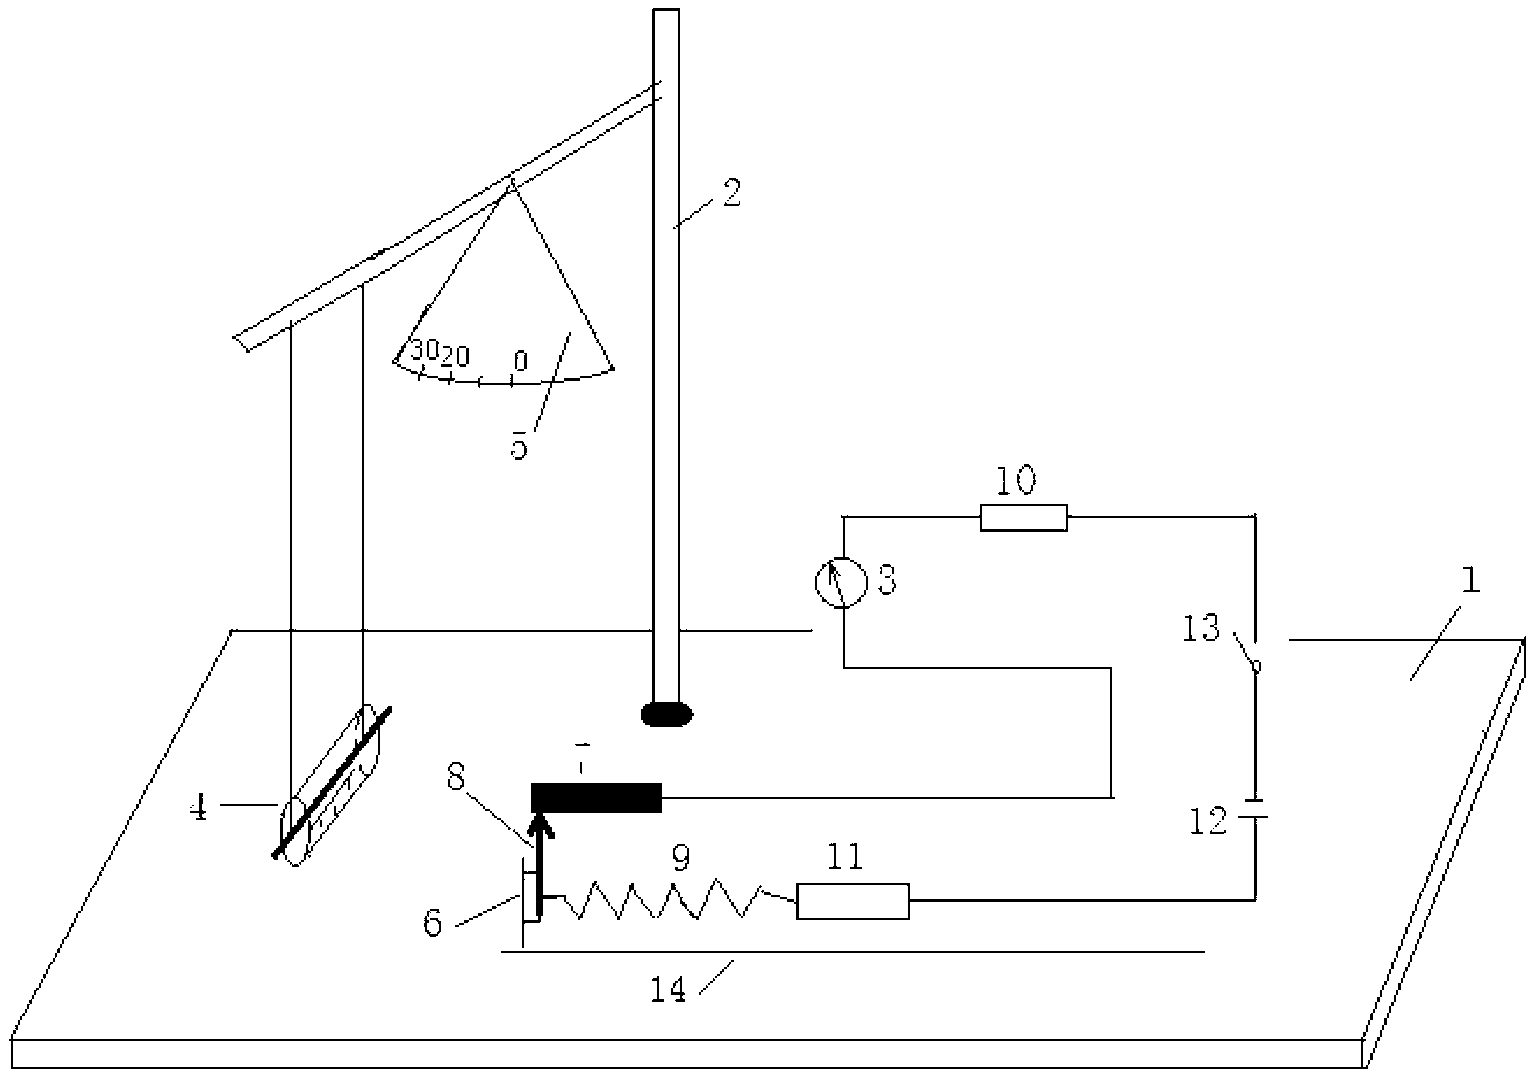 Experimental apparatus for exploring and demonstrating momentum theorem